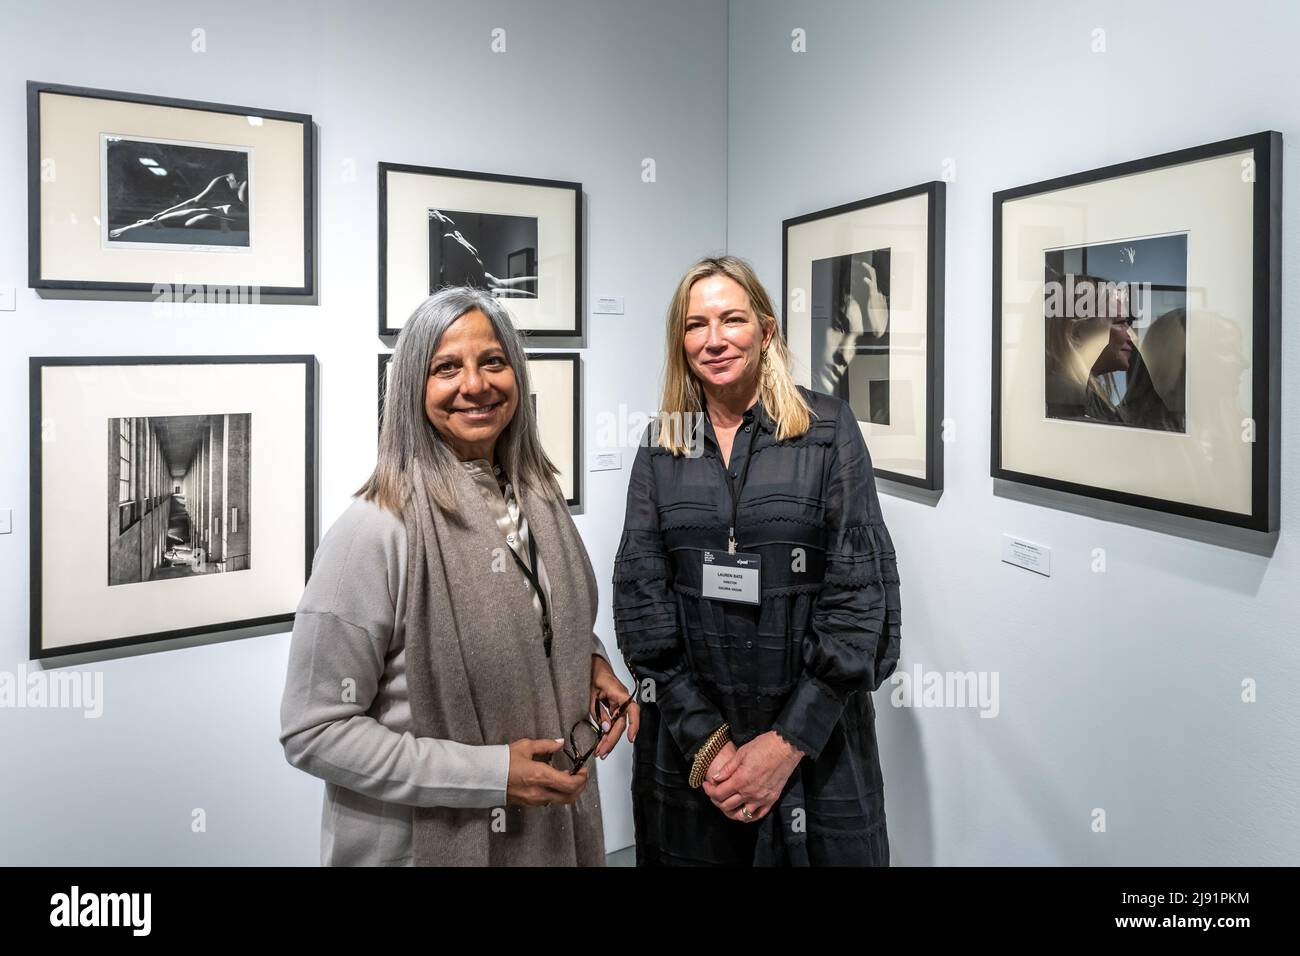 New York, USA. 19th May, 2022. Argentine art gallery Vasari's directors Marina Pellegrini (L) and Lauren Bate pose in front of original silver print photographs by AnneMarie Heinrich during the opening day of The Photography Show presented by AIPAD (Association of International Photography Art Dealers) in New York City. The show brings together 49 of the world's leading galleries of fine art photography. Credit: Enrique Shore/Alamy Live News Stock Photo